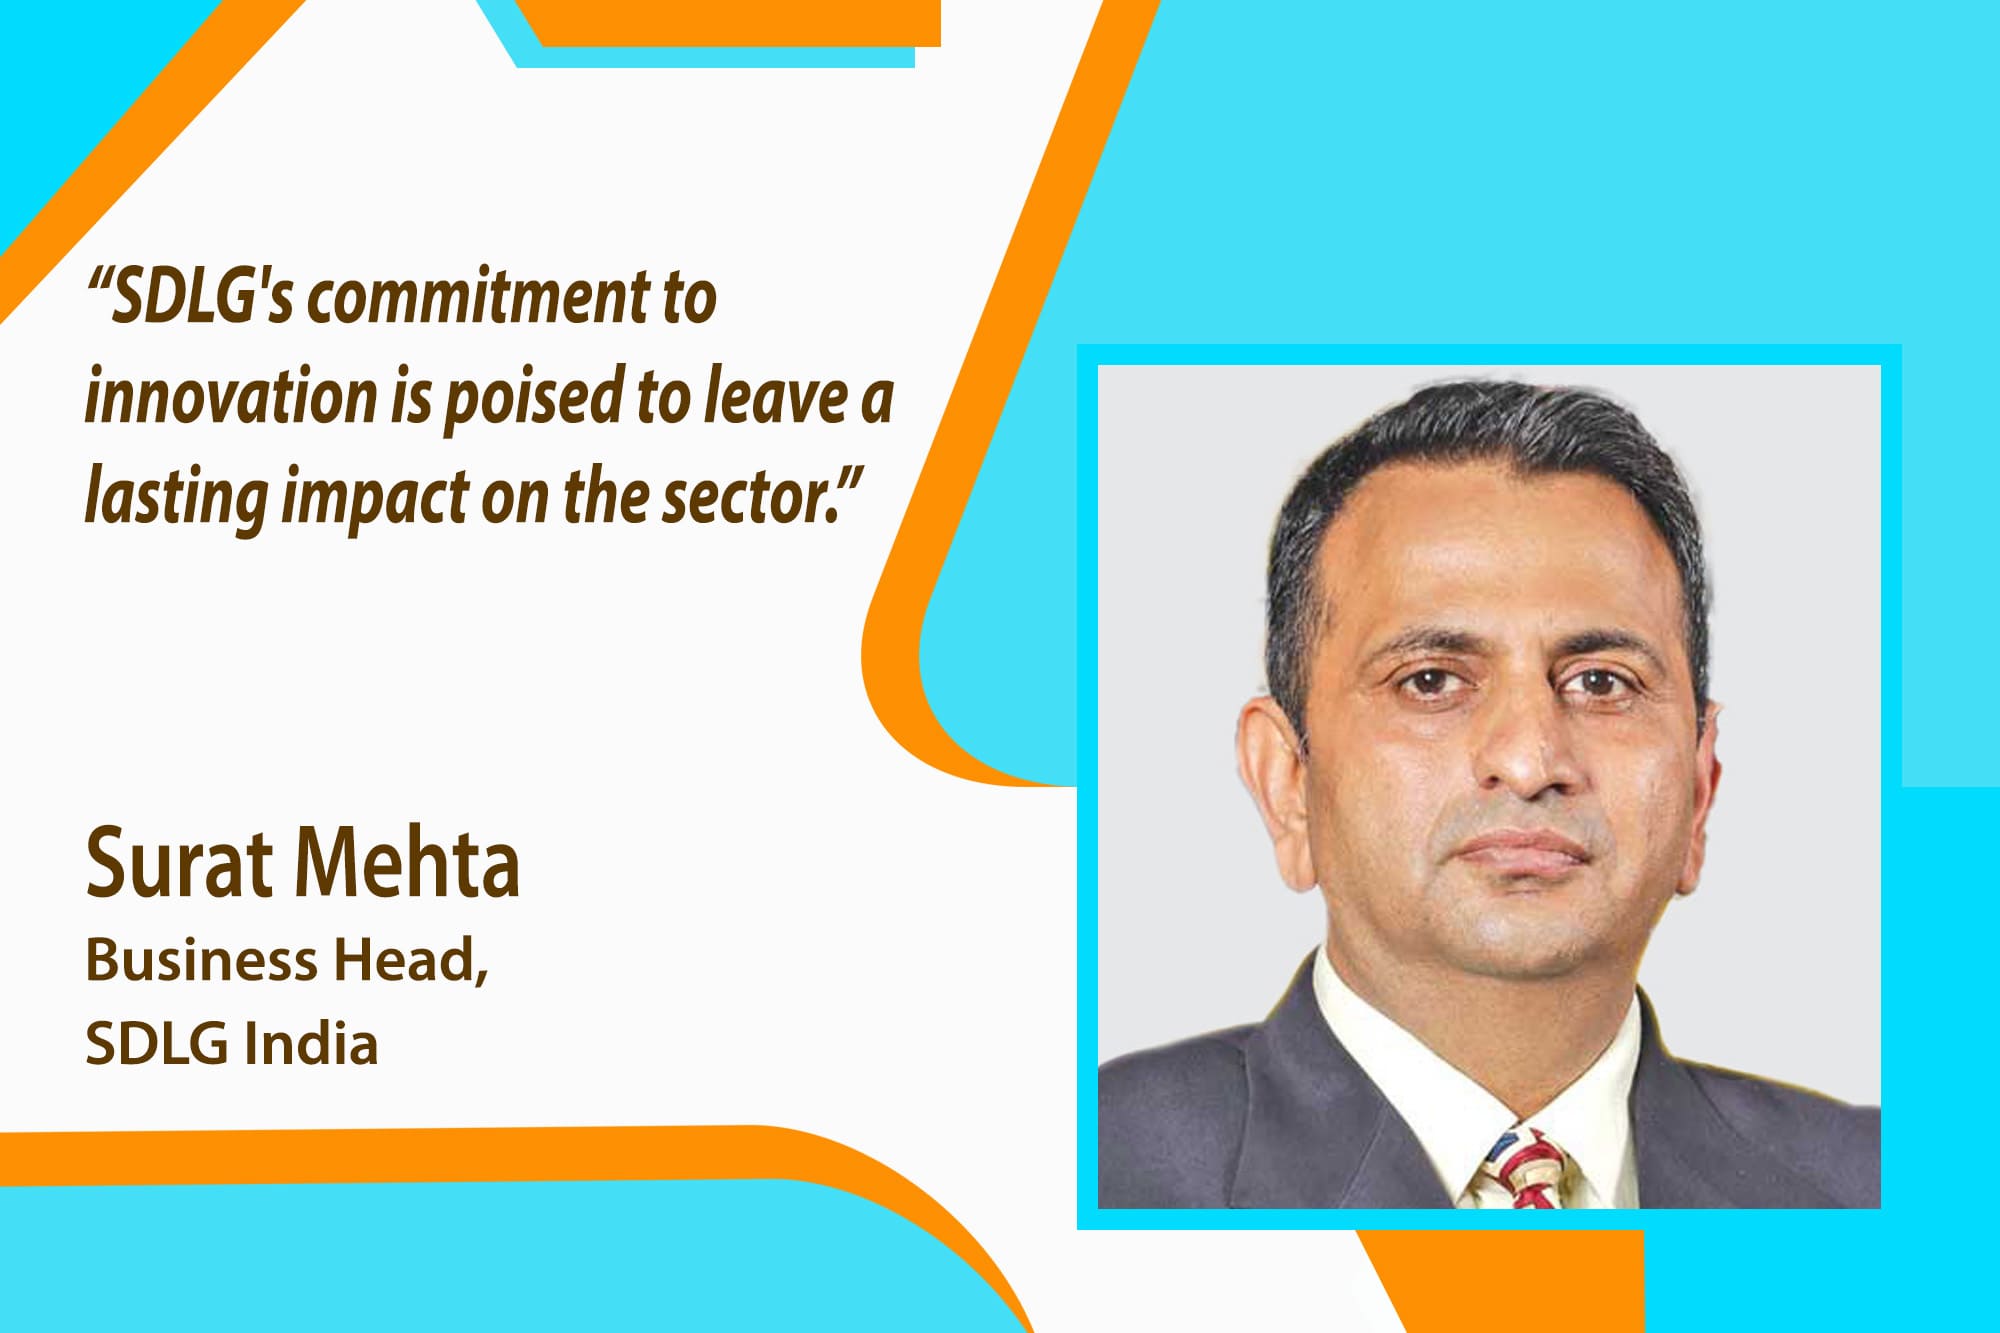 In an exclusive interview with B2B Magazine, Surat Mehta, Business Head of SDLG India, shares insights into the latest developments and innovations in the construction equipment industry showcased at Excon 2023.